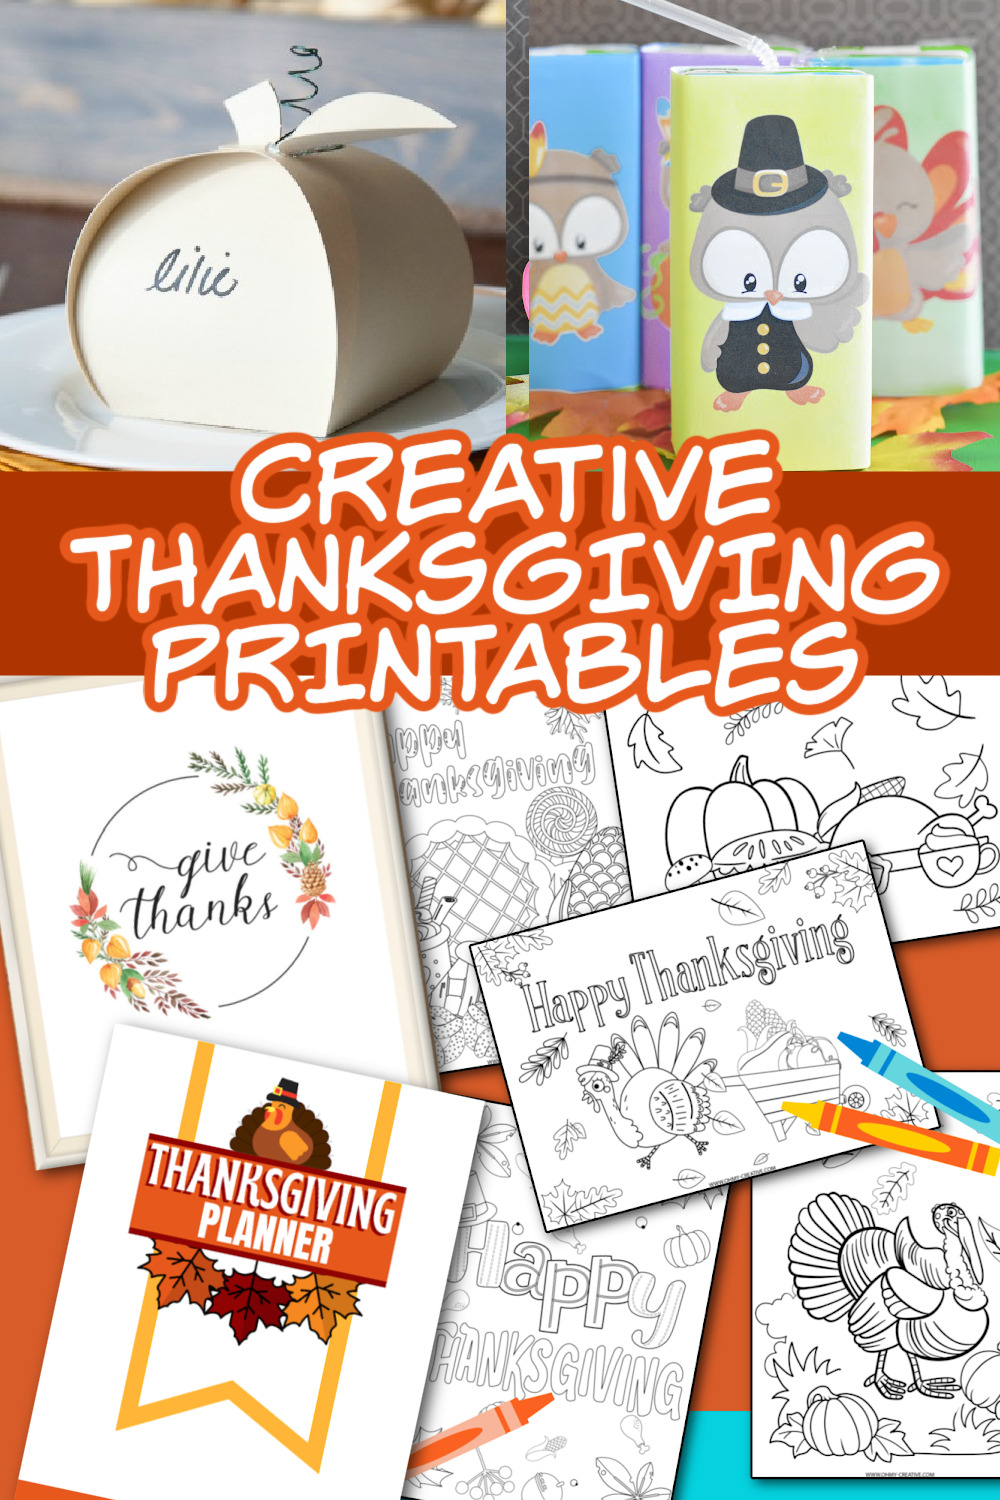 A collage of Thanksgiving printables.